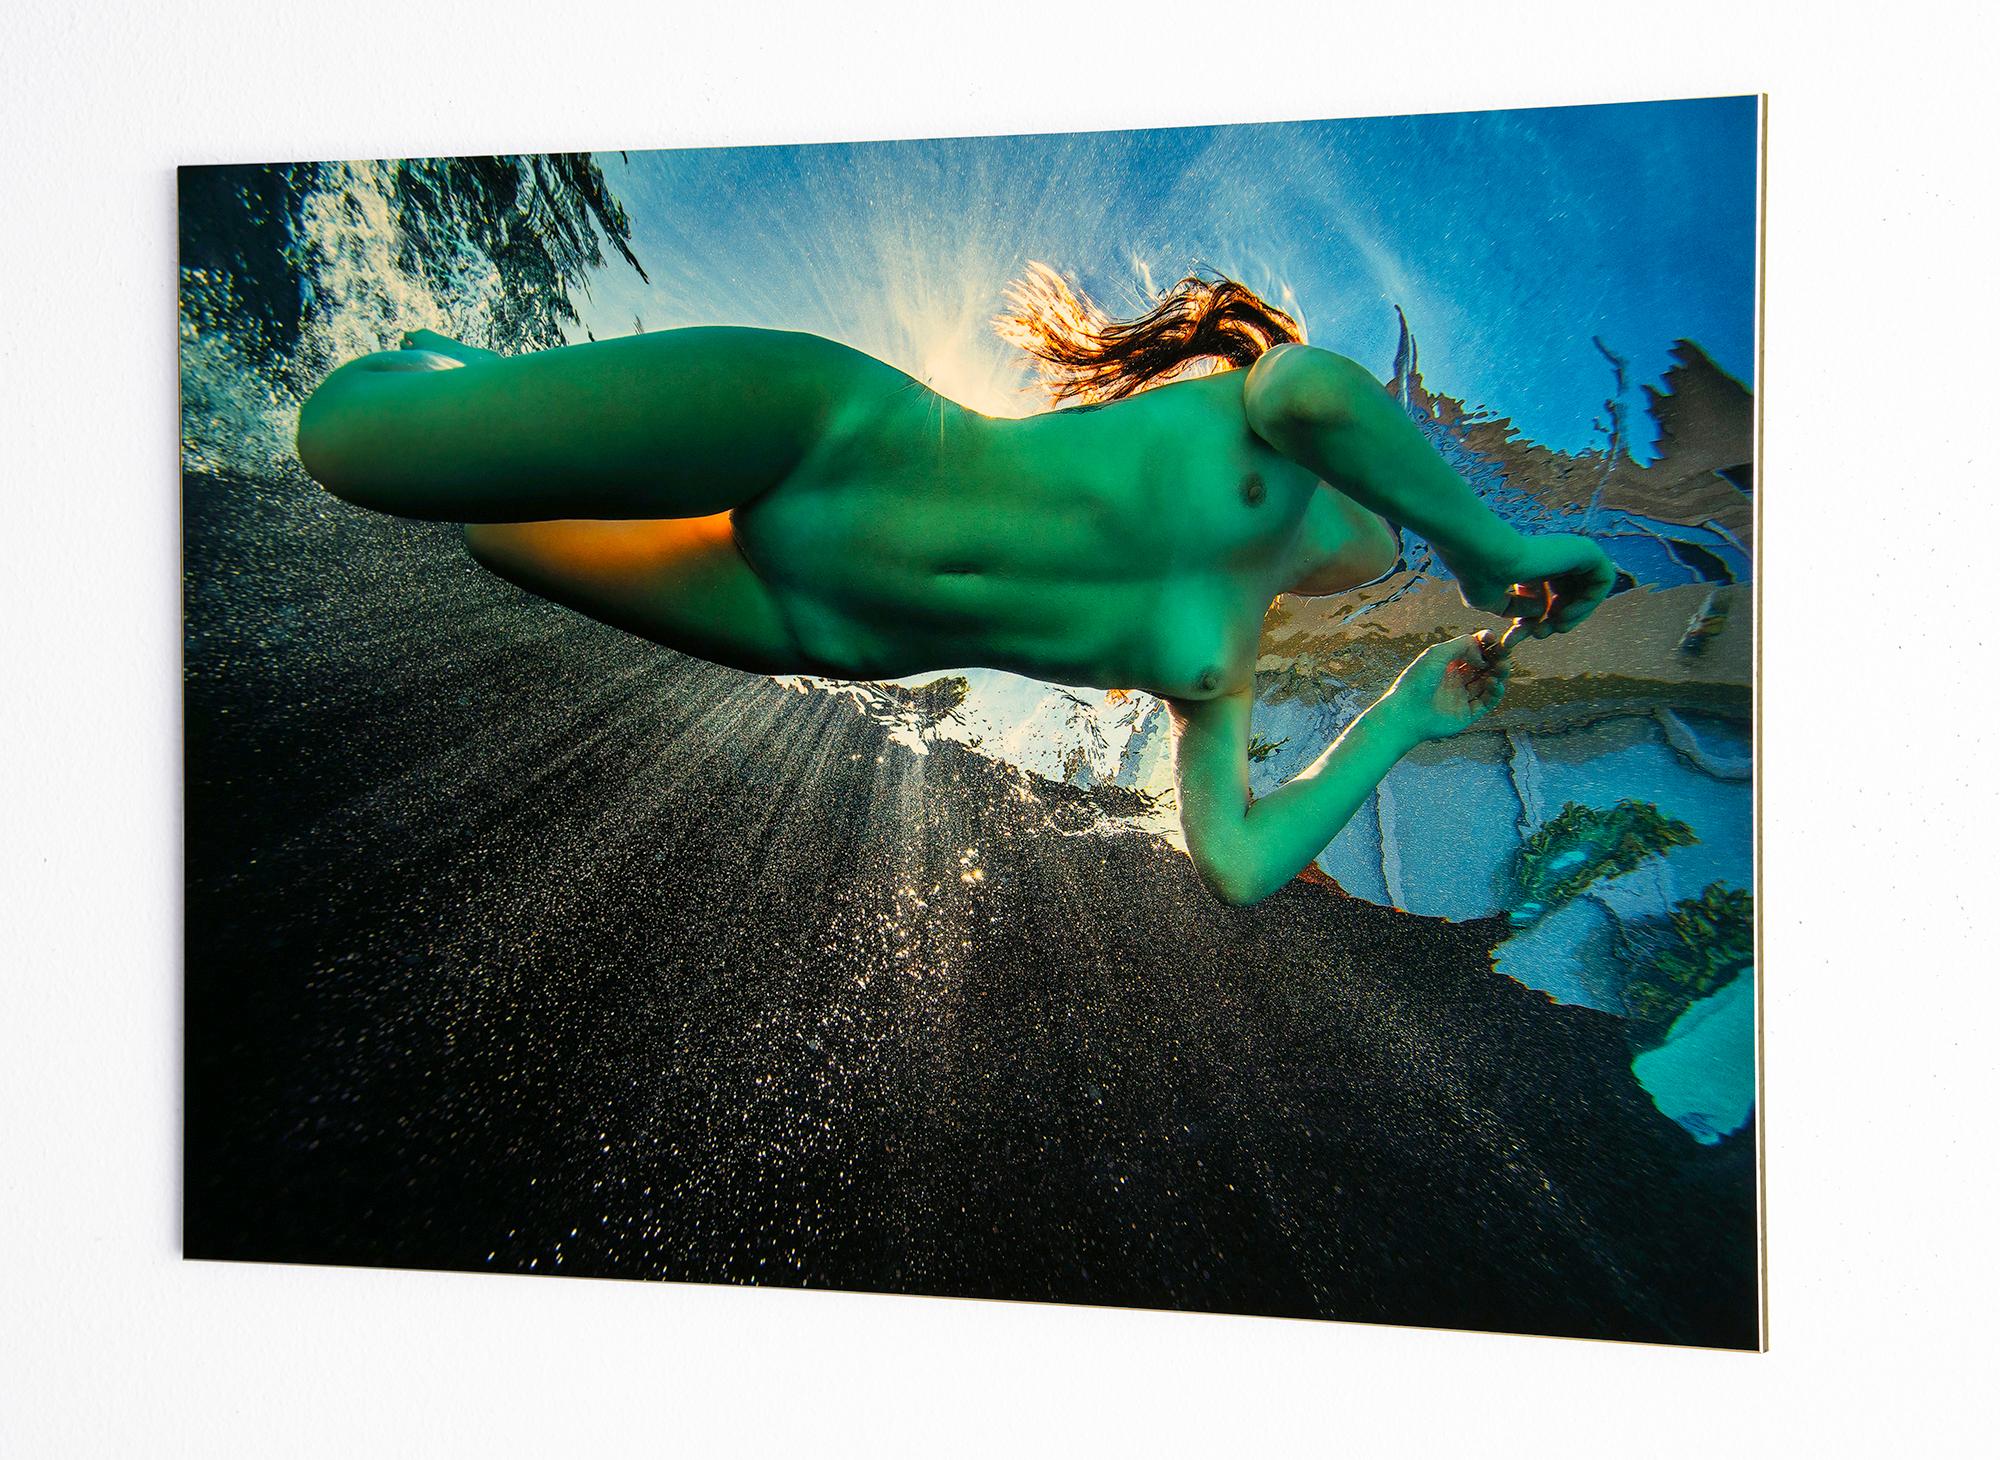 The Real Mermaid - underwater nude photograph - print on aluminum 24x36